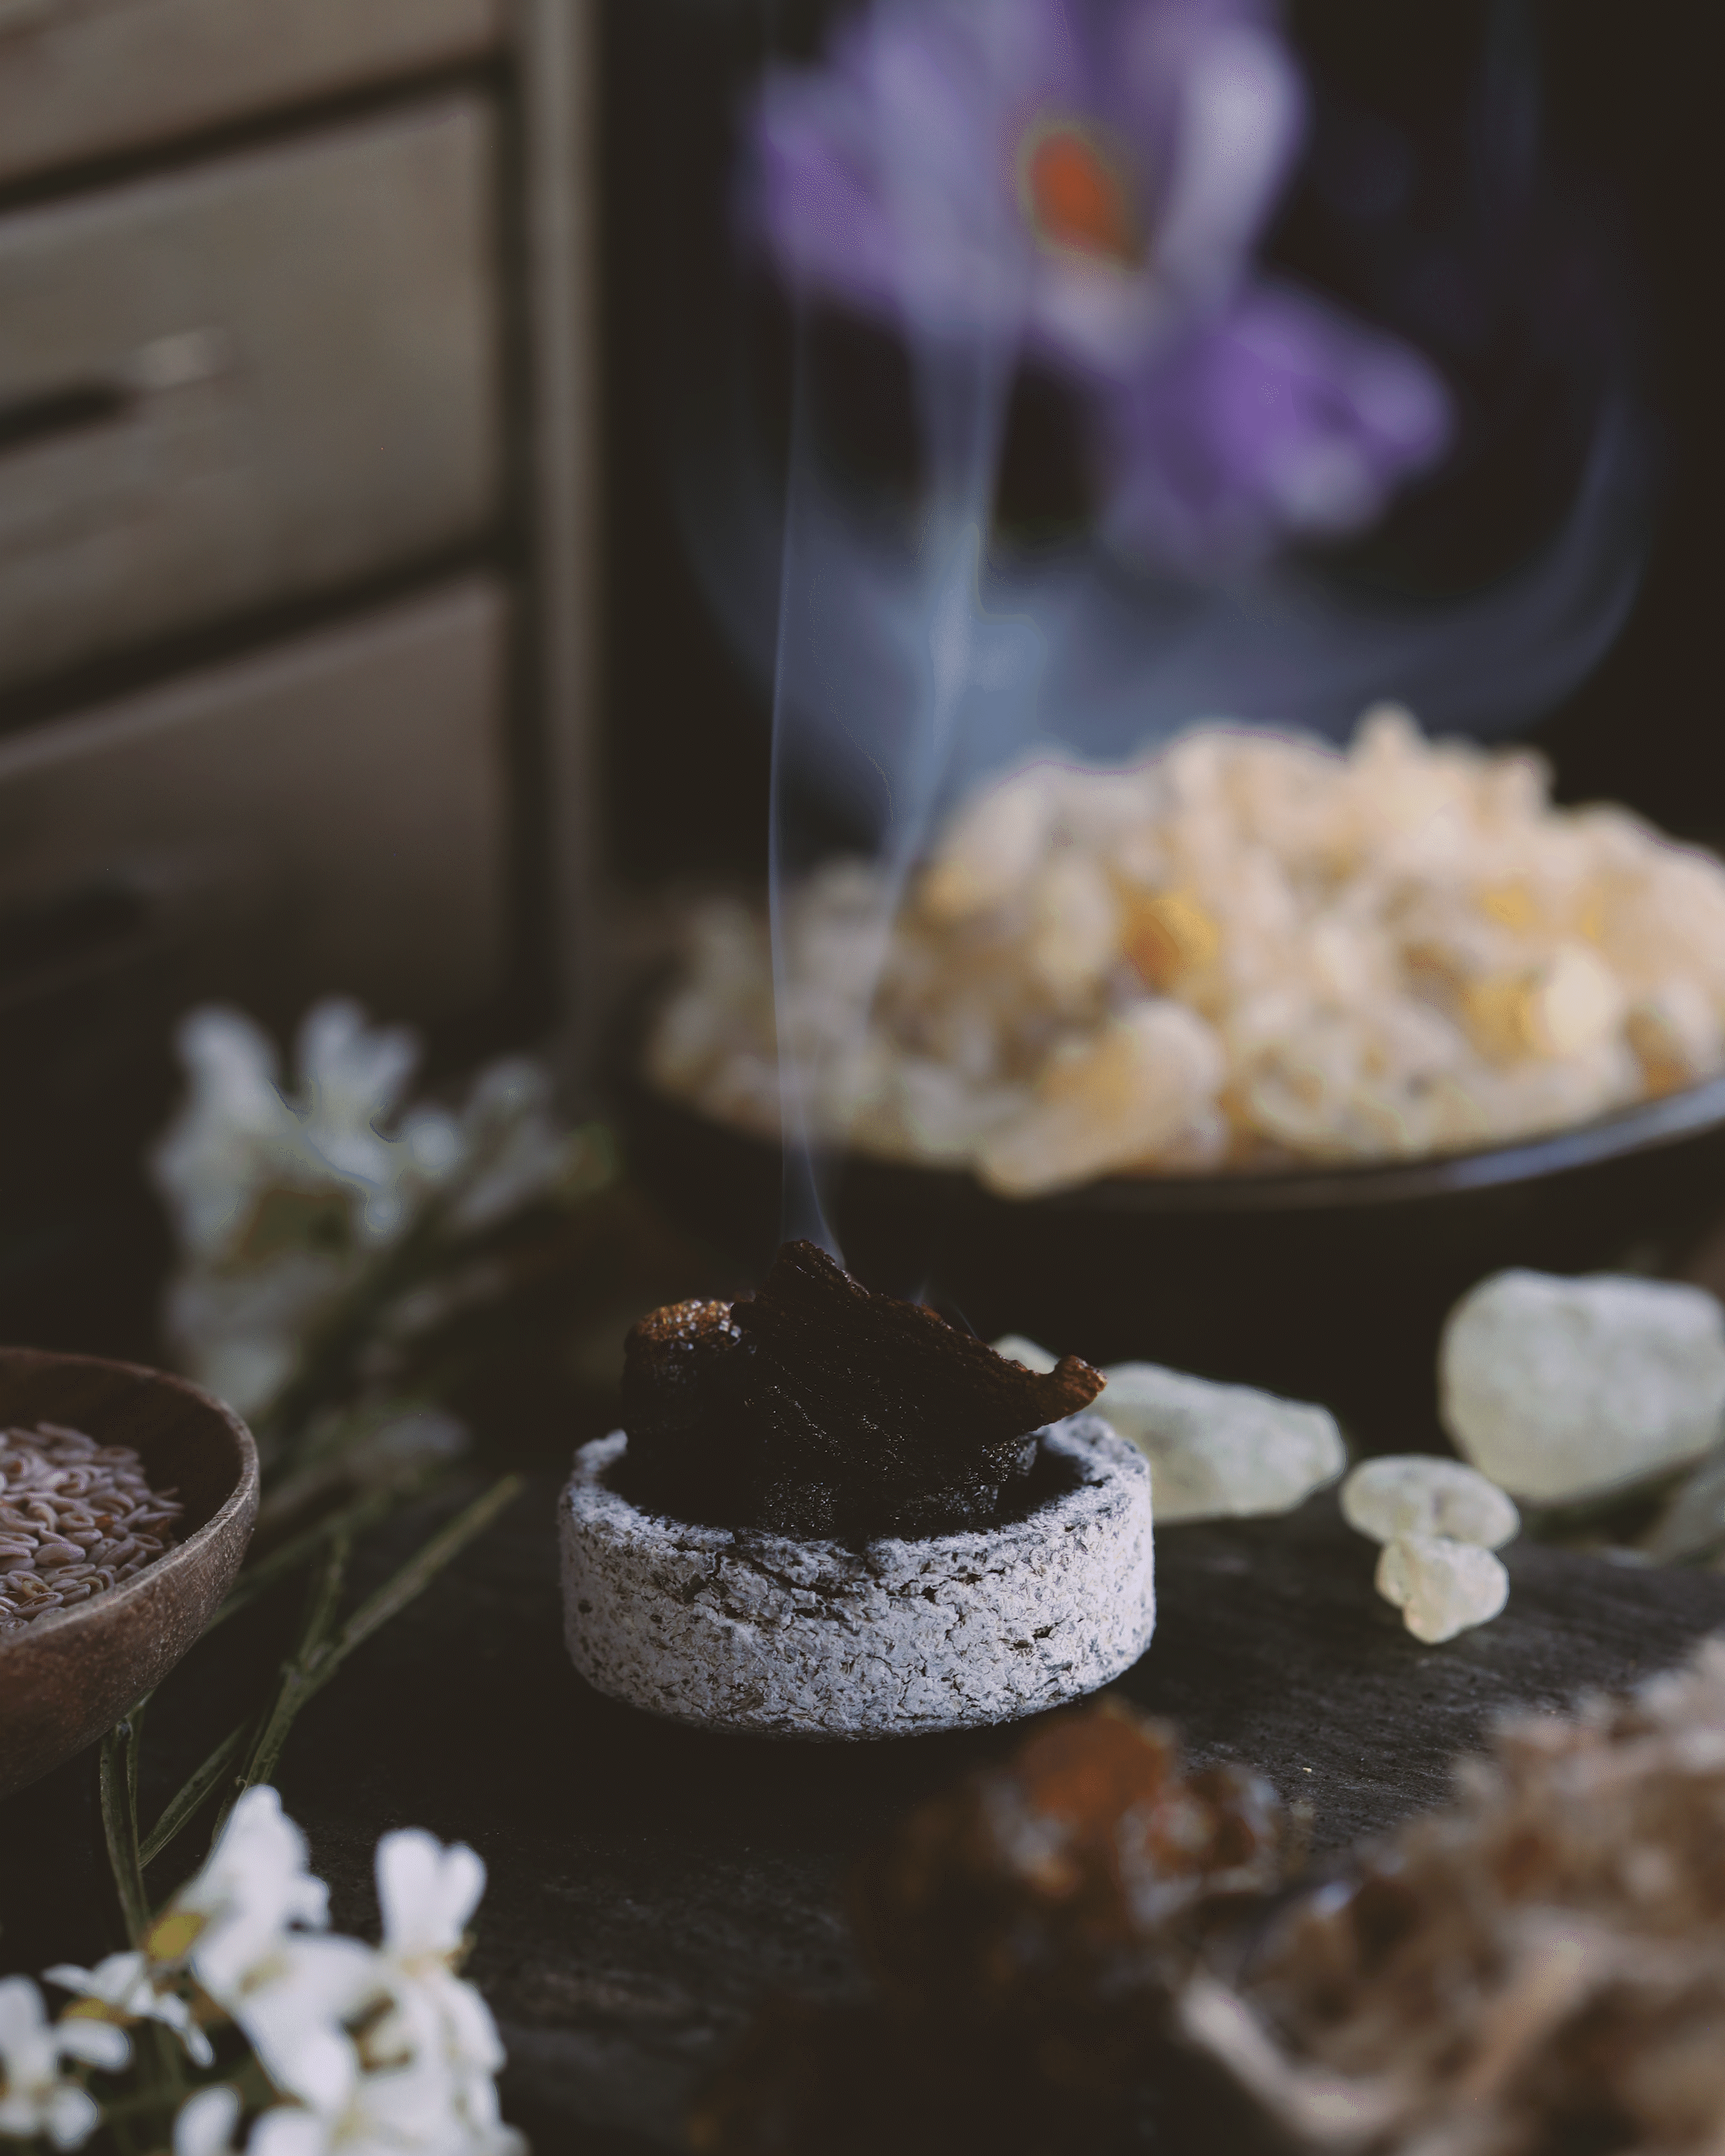 Resin incense burning on a charcoal round with smoke rising.